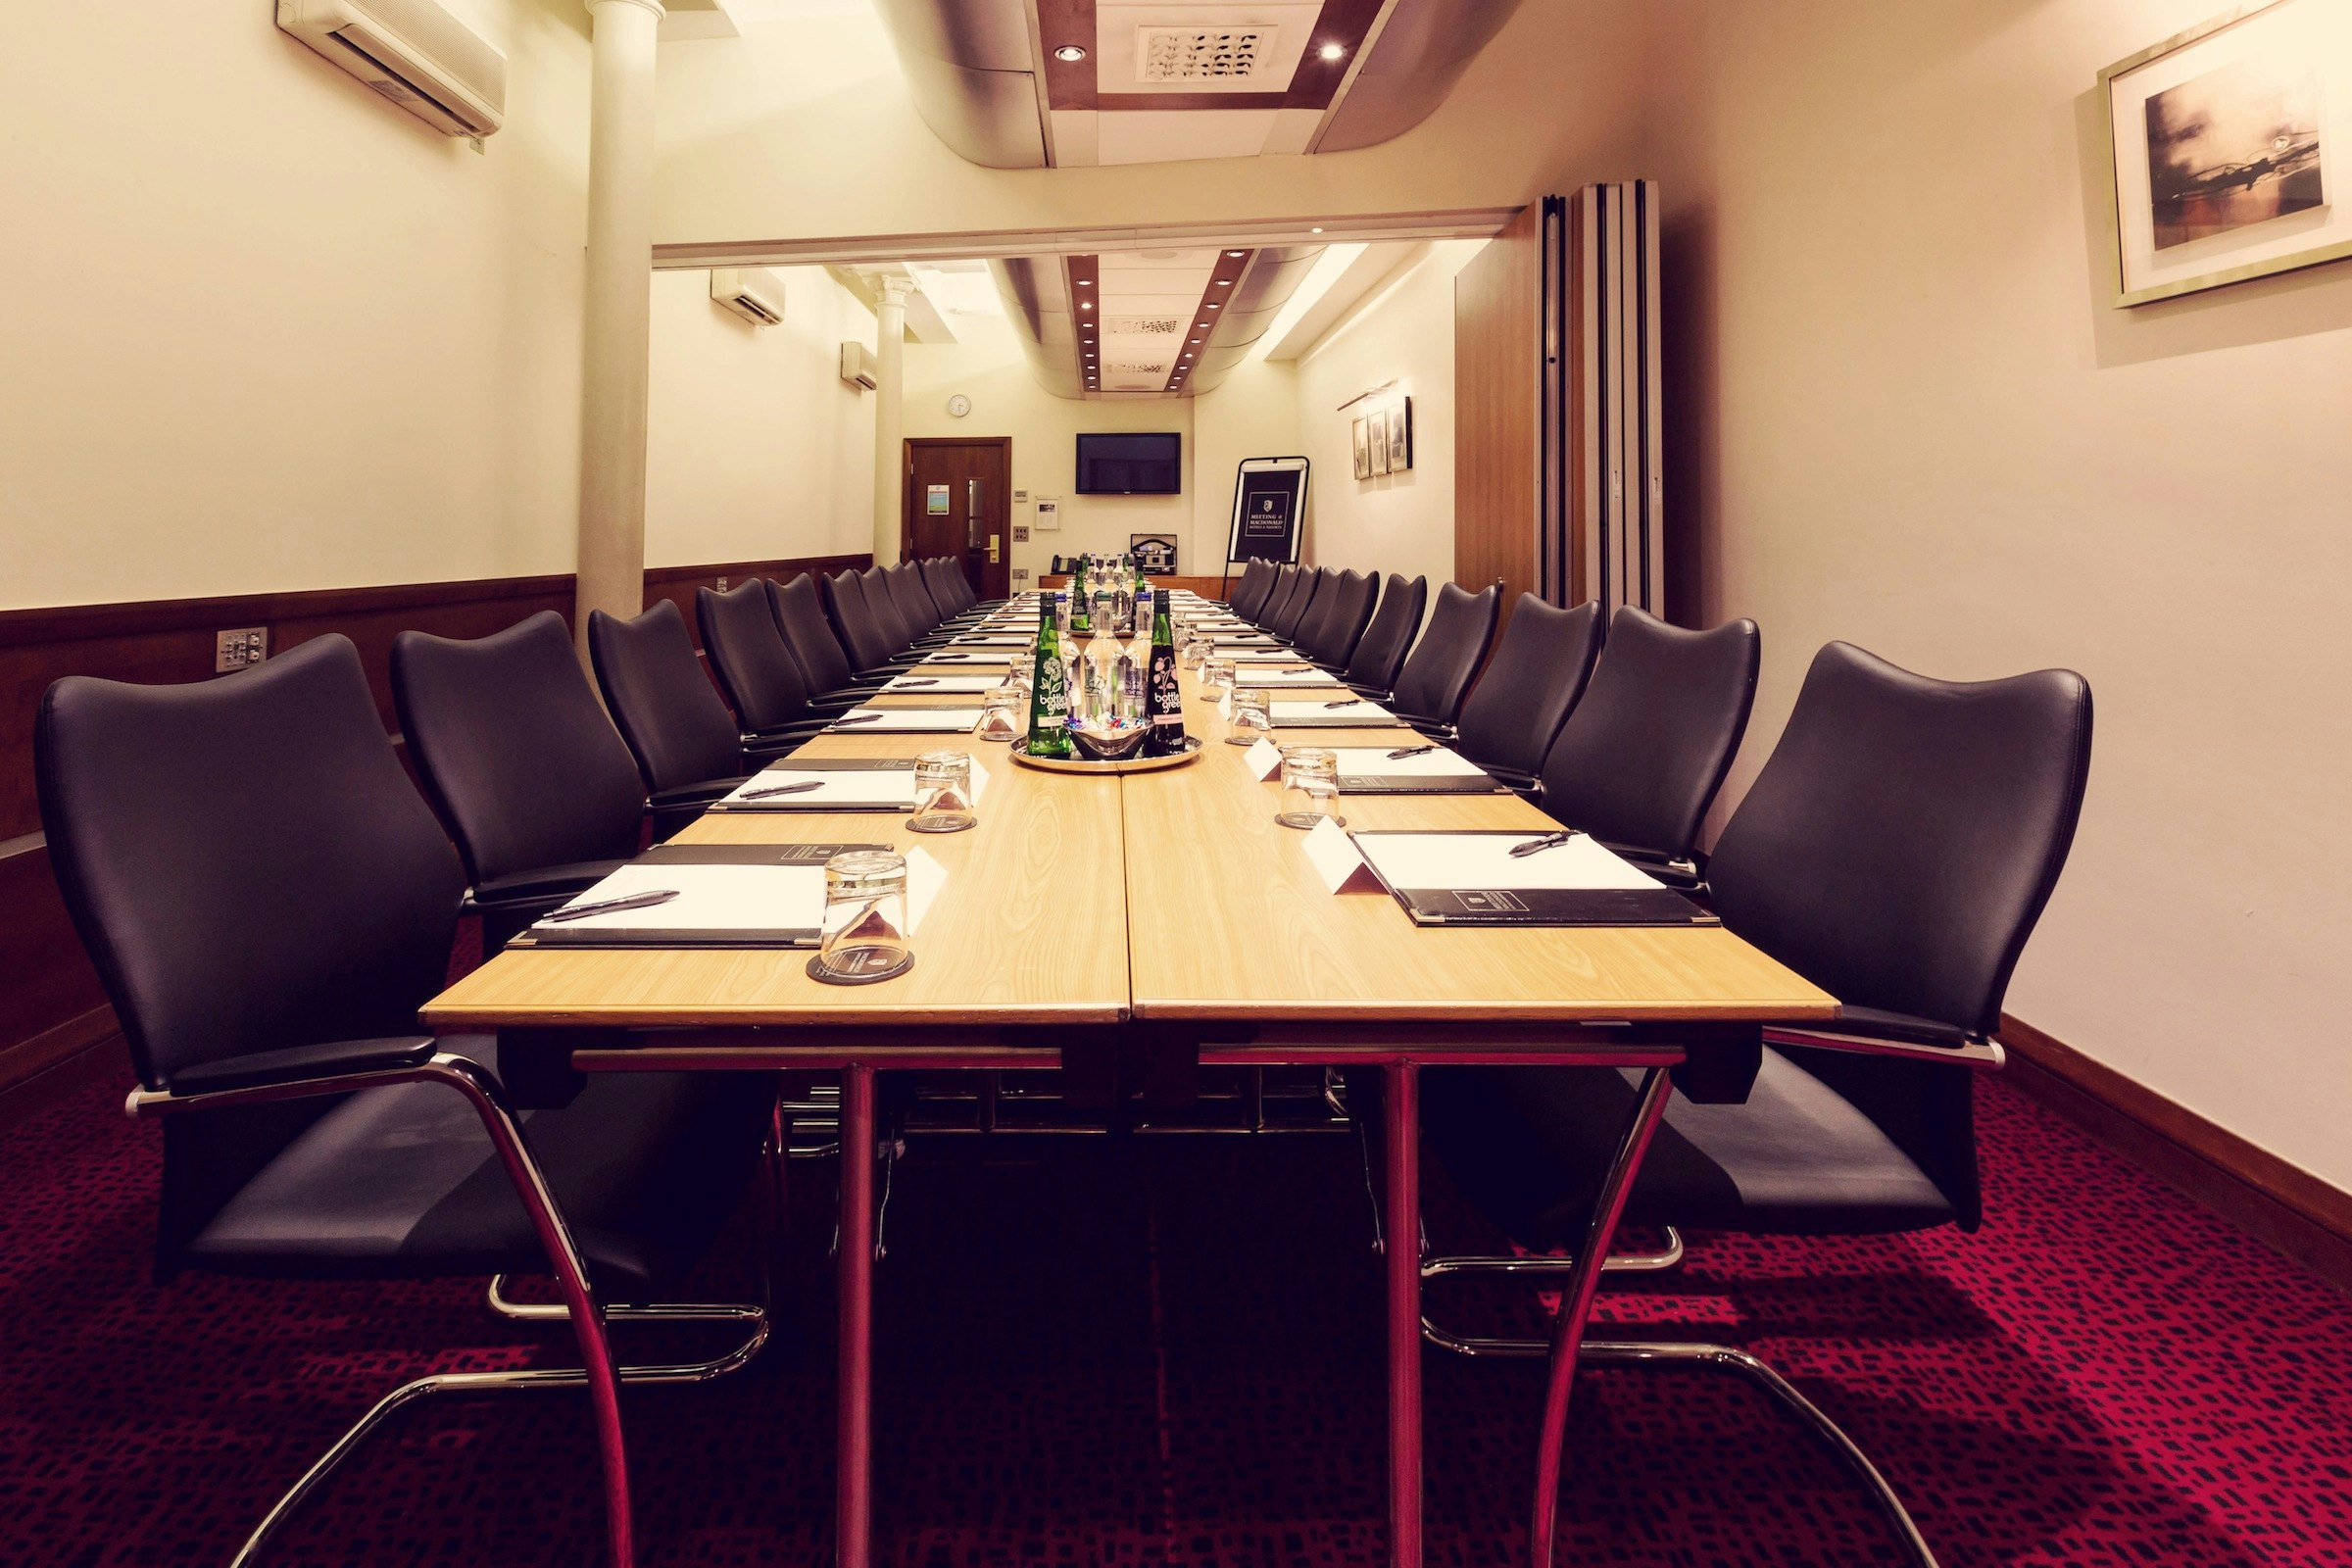 Hotel Function Rooms Venues in Manchester - Townhouse Hotel Manchester